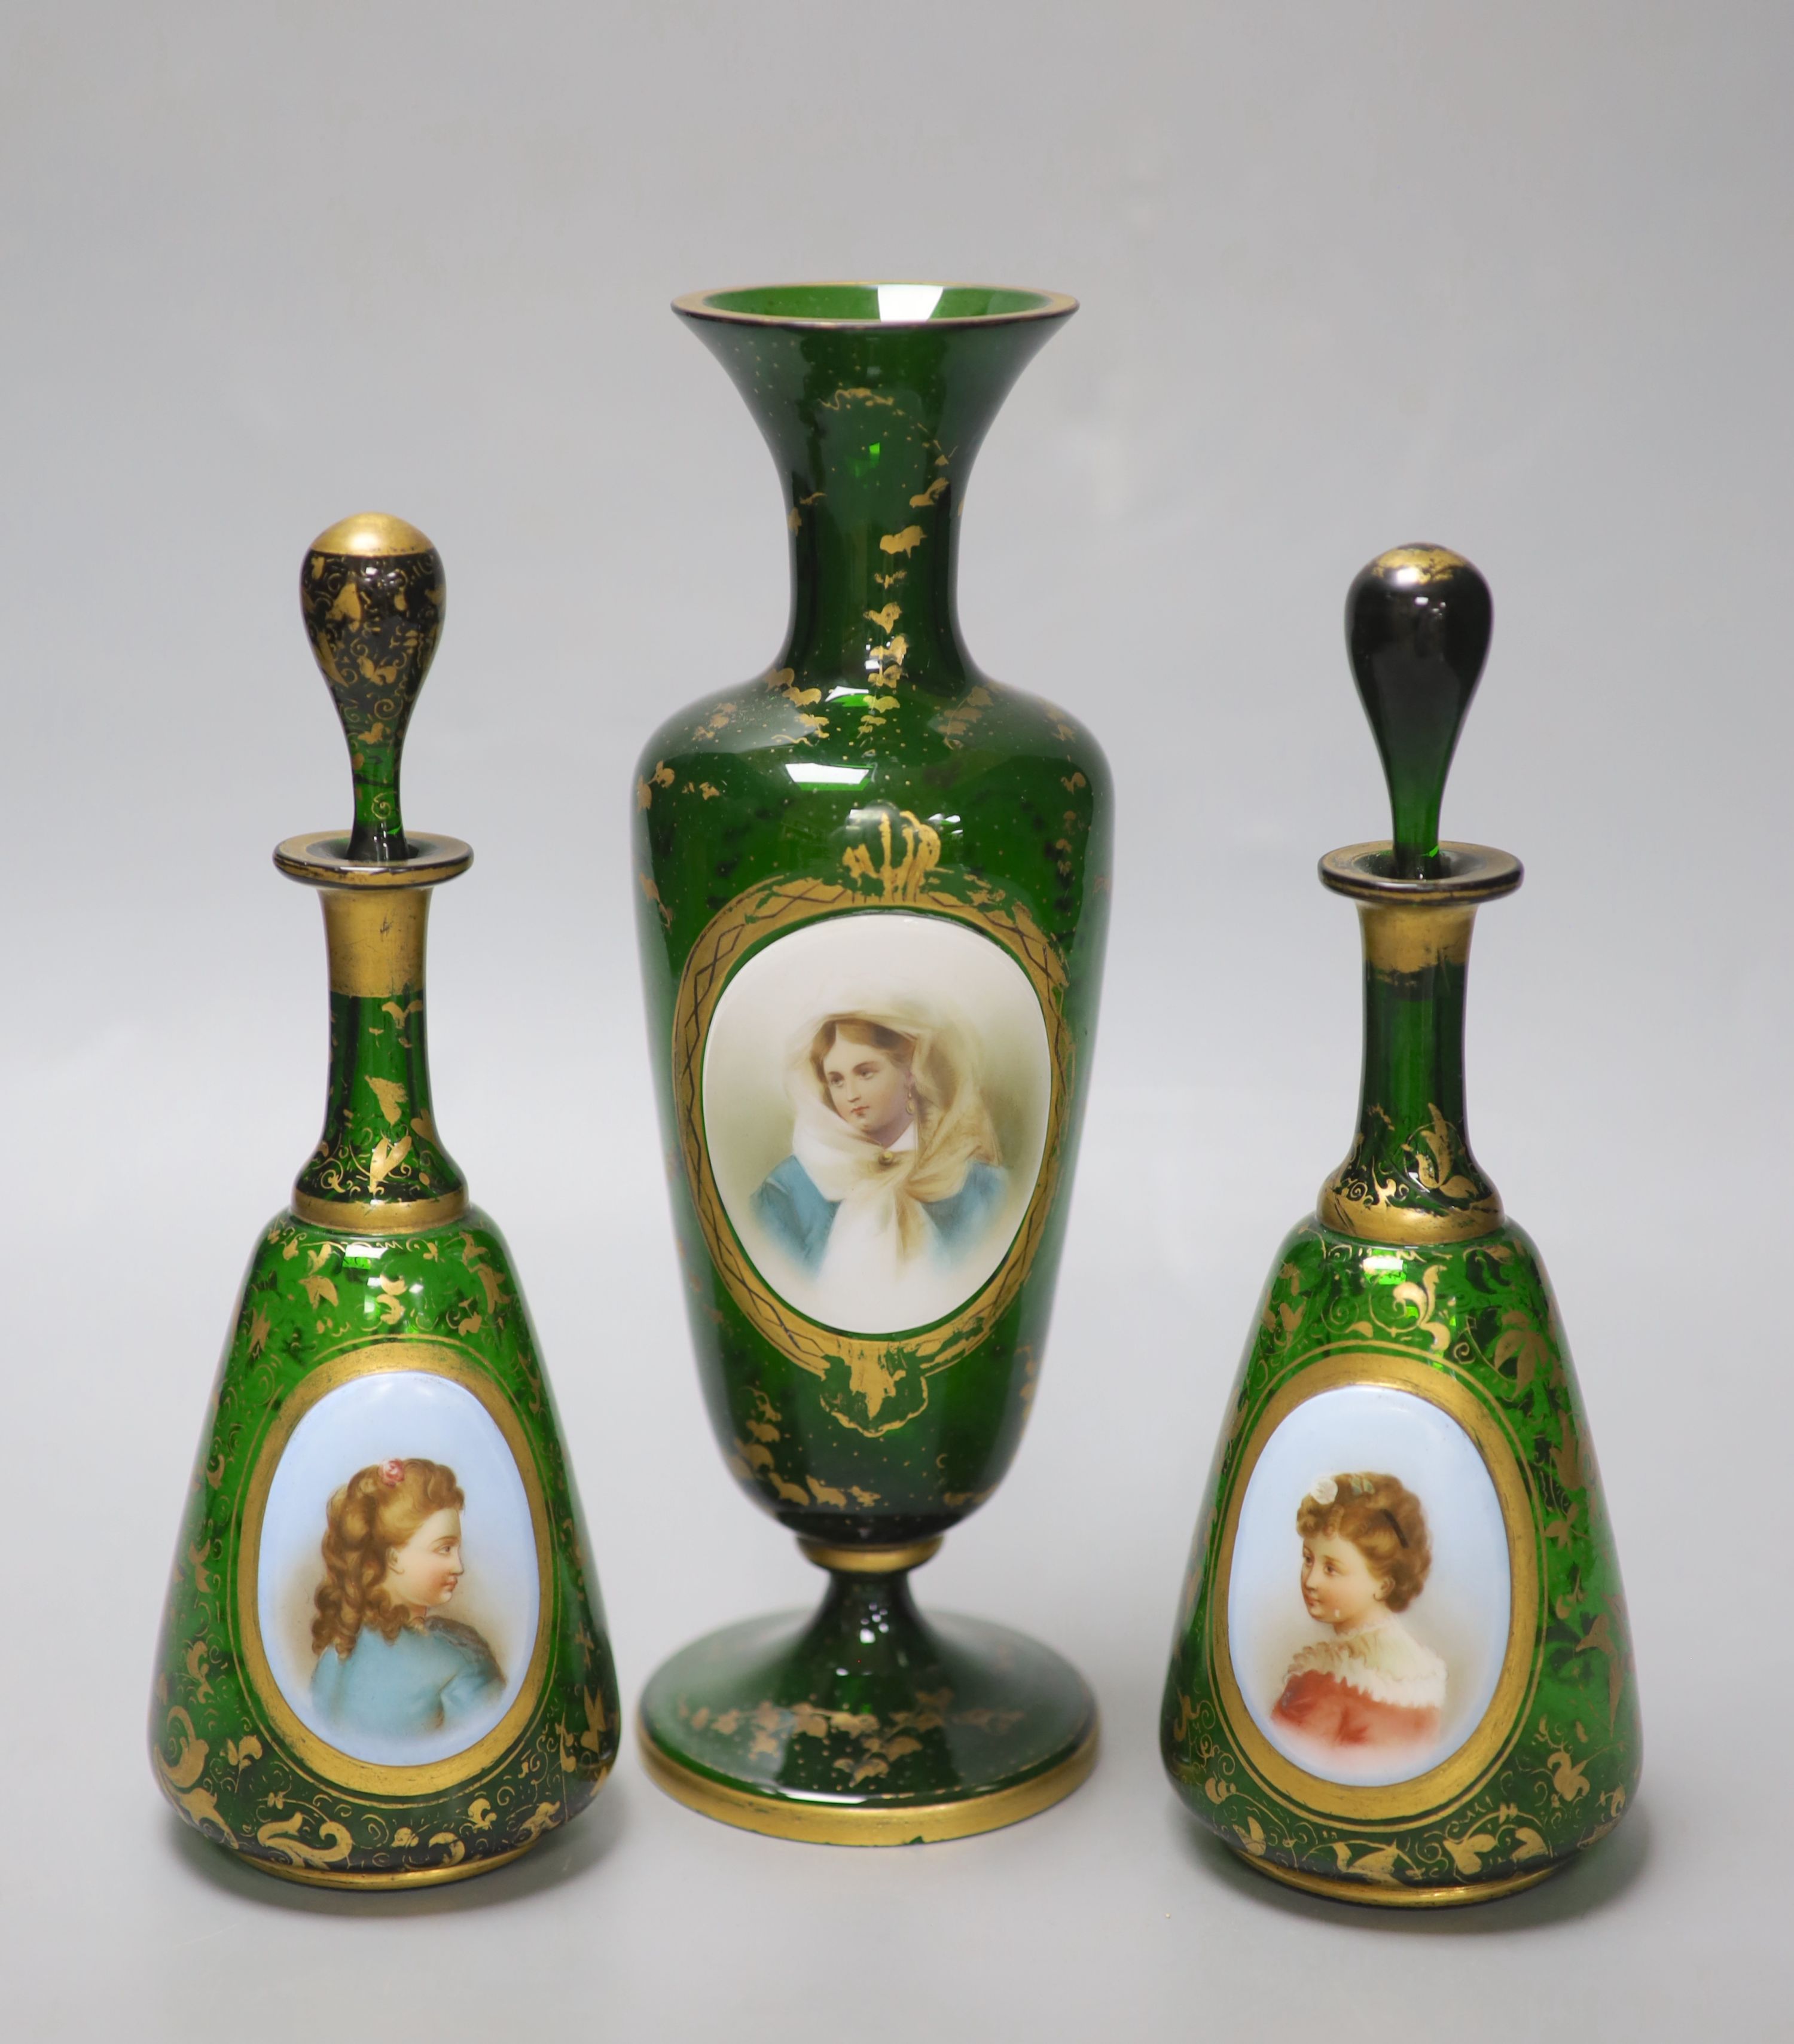 A Bohemian gilded glass vase with porcelain portrait plaque, late 19th century and a pair of similar